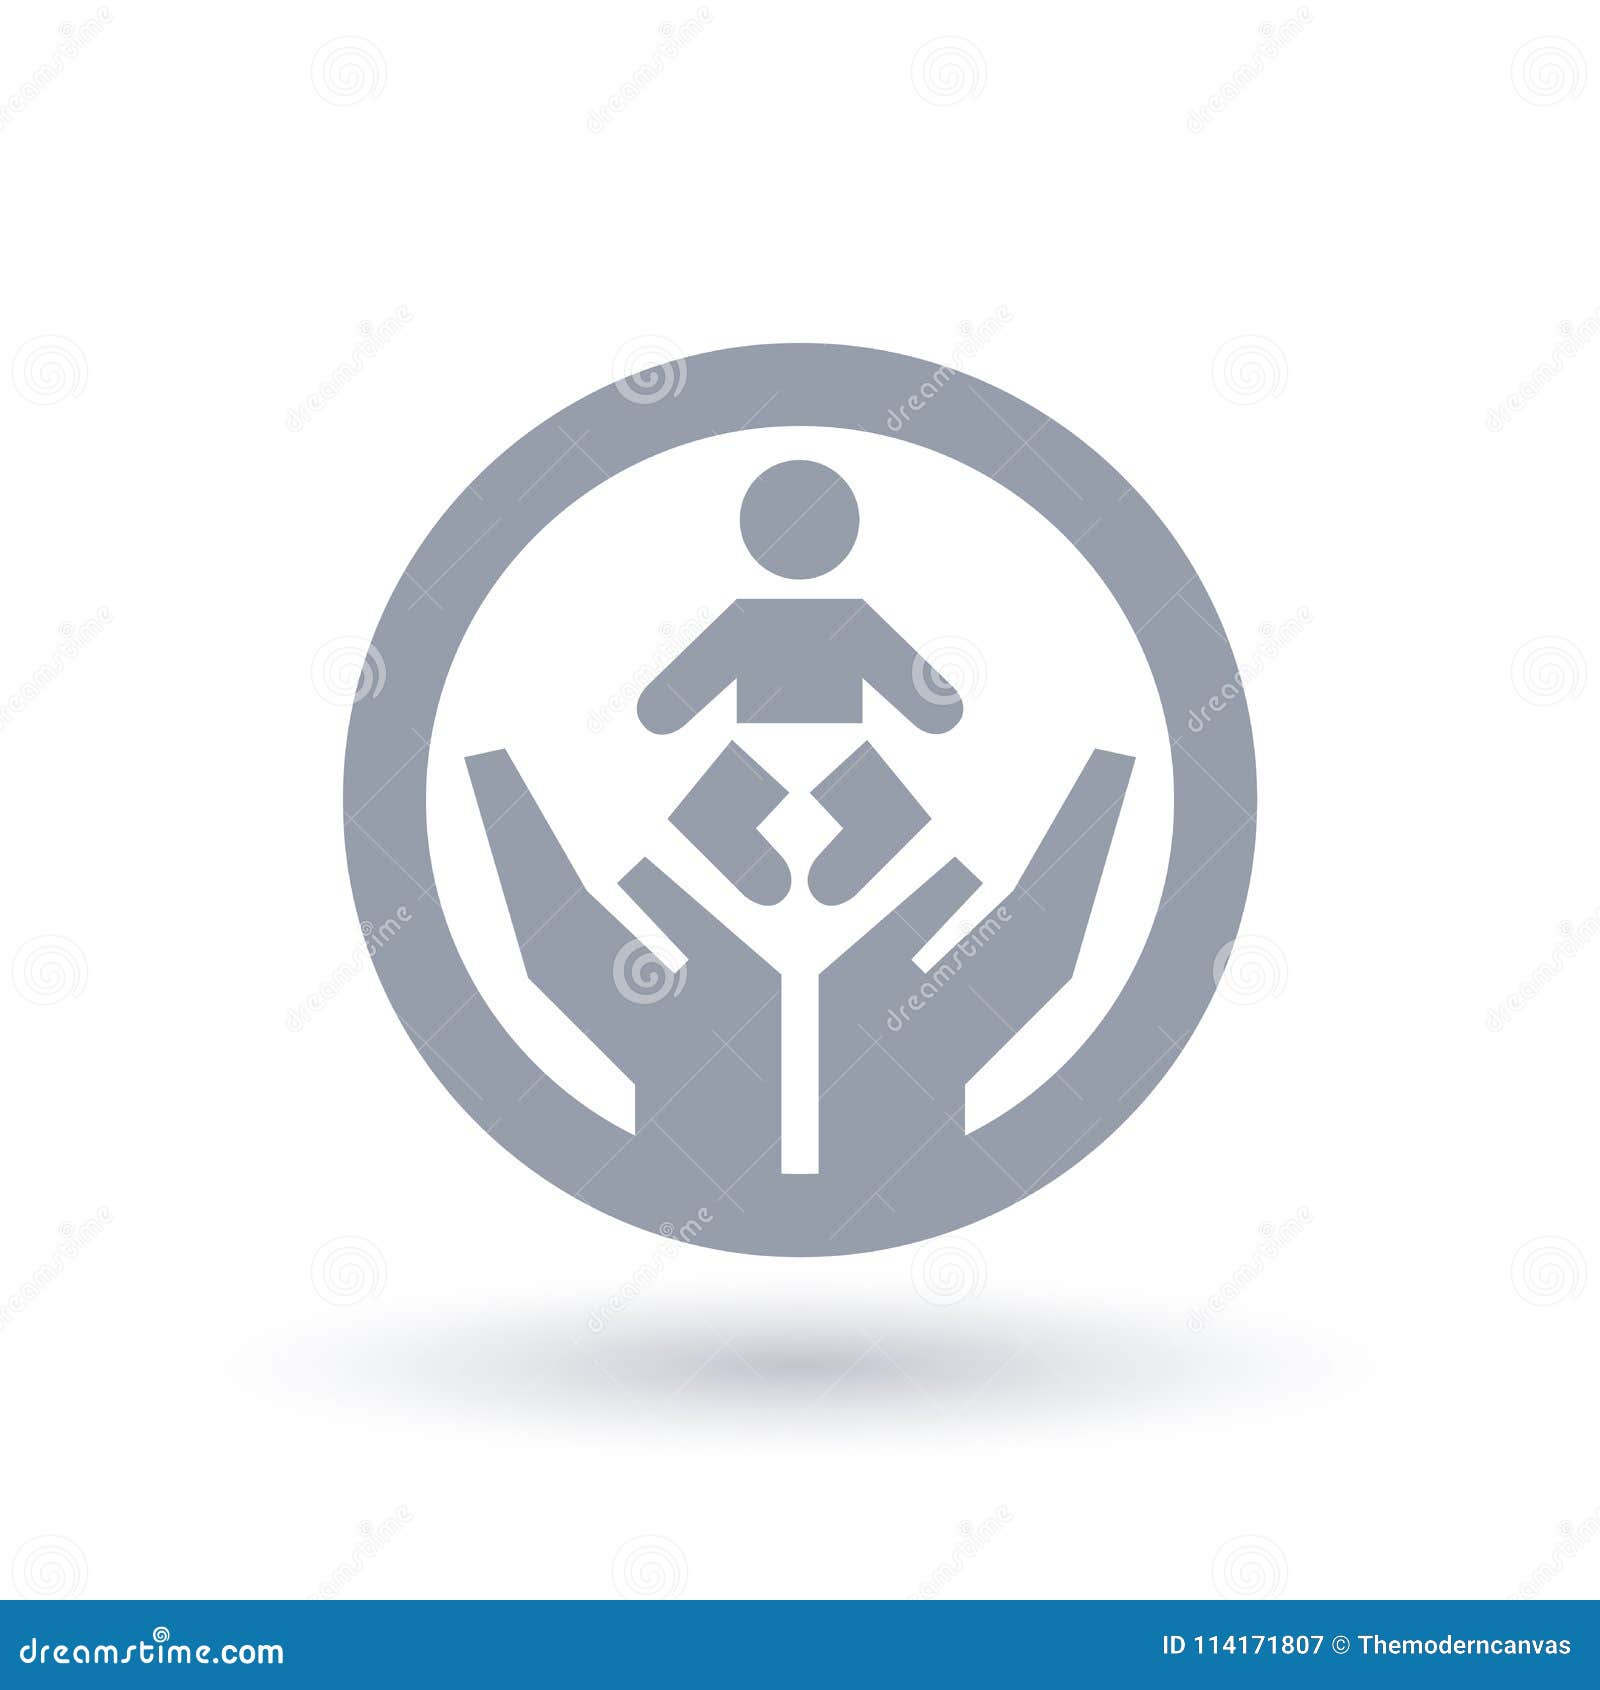 hands and baby icon. infant . newborn sign.